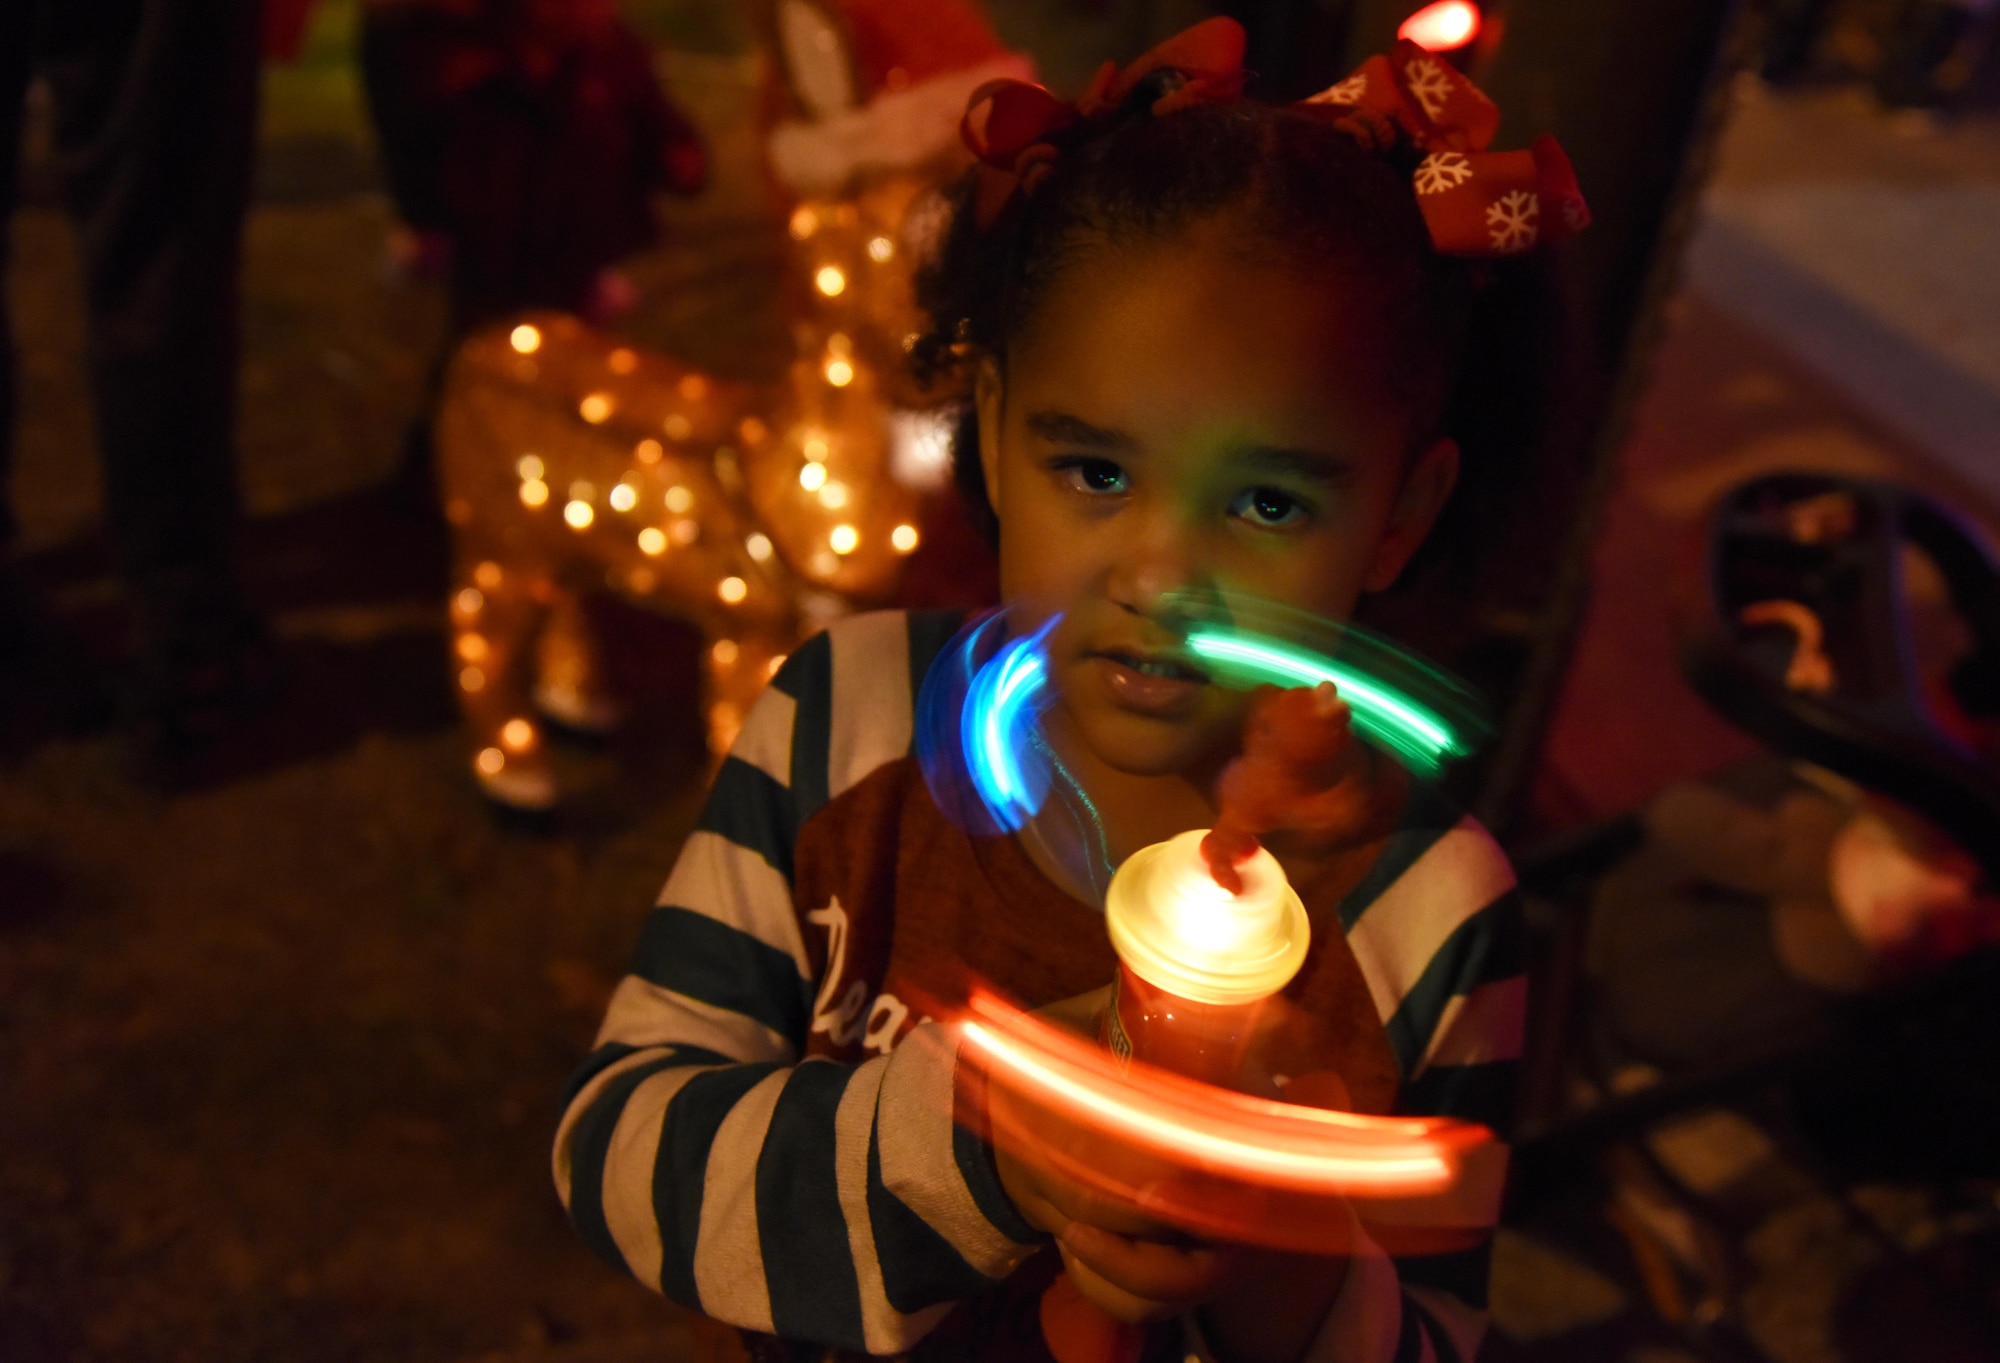 Avery Davis, granddaughter of U.S. Air Force Retired Master Sgt. Chad Jacob, plays with a light toy during Christmas in the Park at Keesler Air Force Base, Mississippi, Dec. 6, 2018. The event hosted by Outdoor Recreation included cookie and ornament decorating, games and visits with Santa. (U.S. Air Force photo by Kemberly Groue)